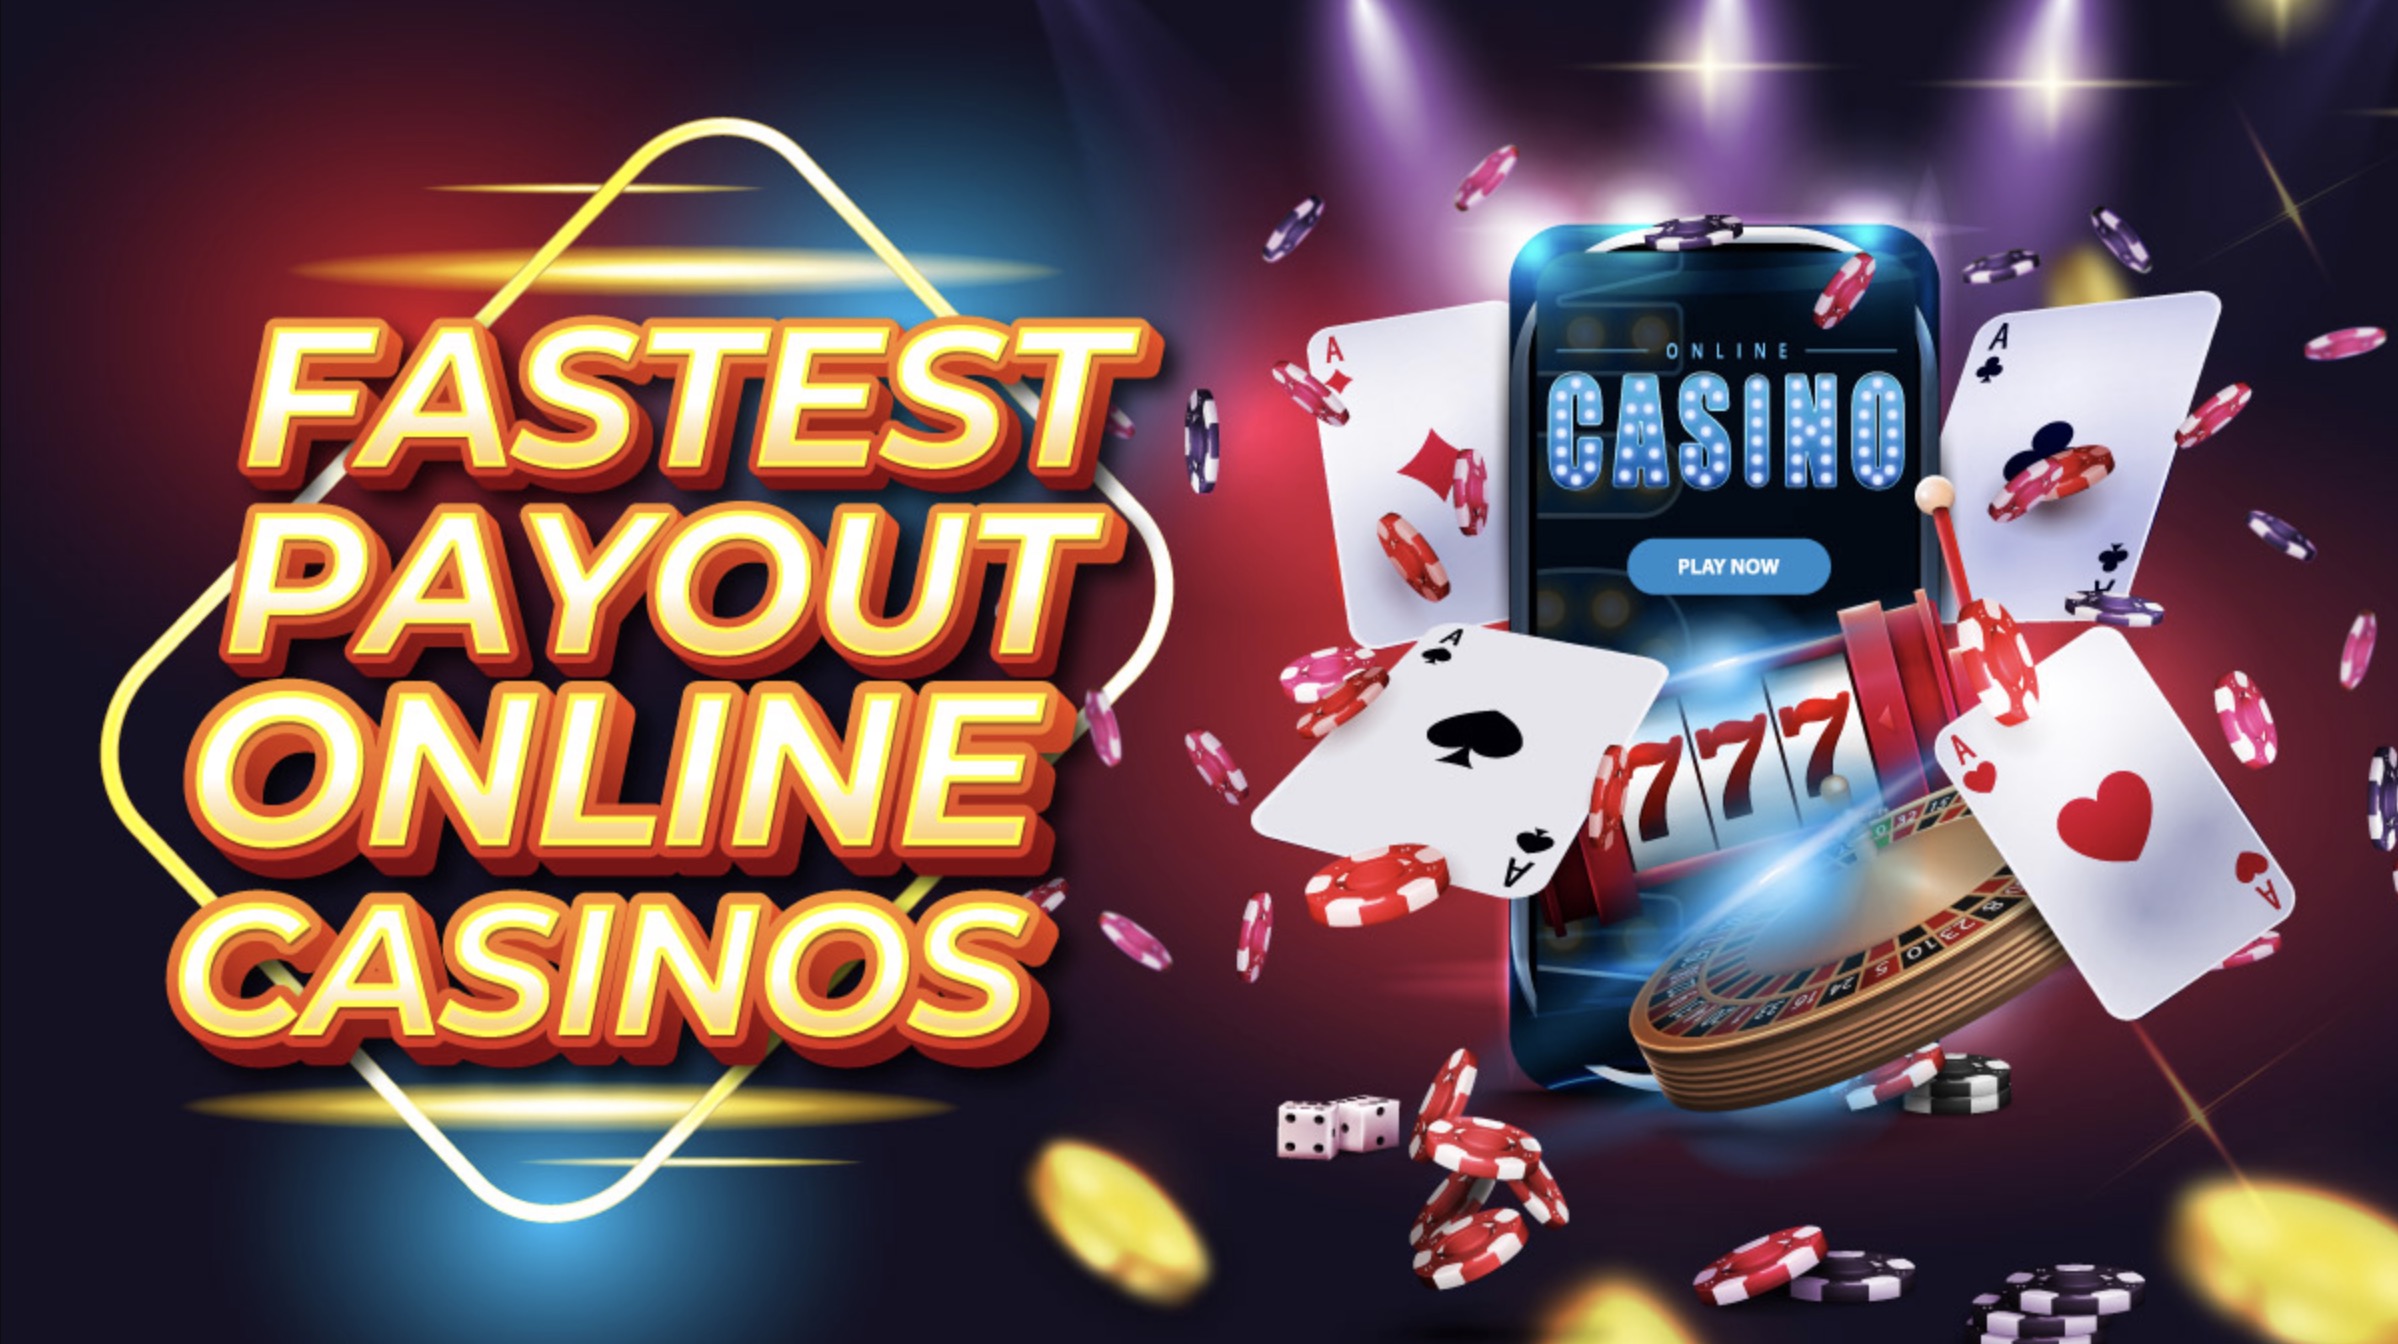 Best Instant Payout Casinos